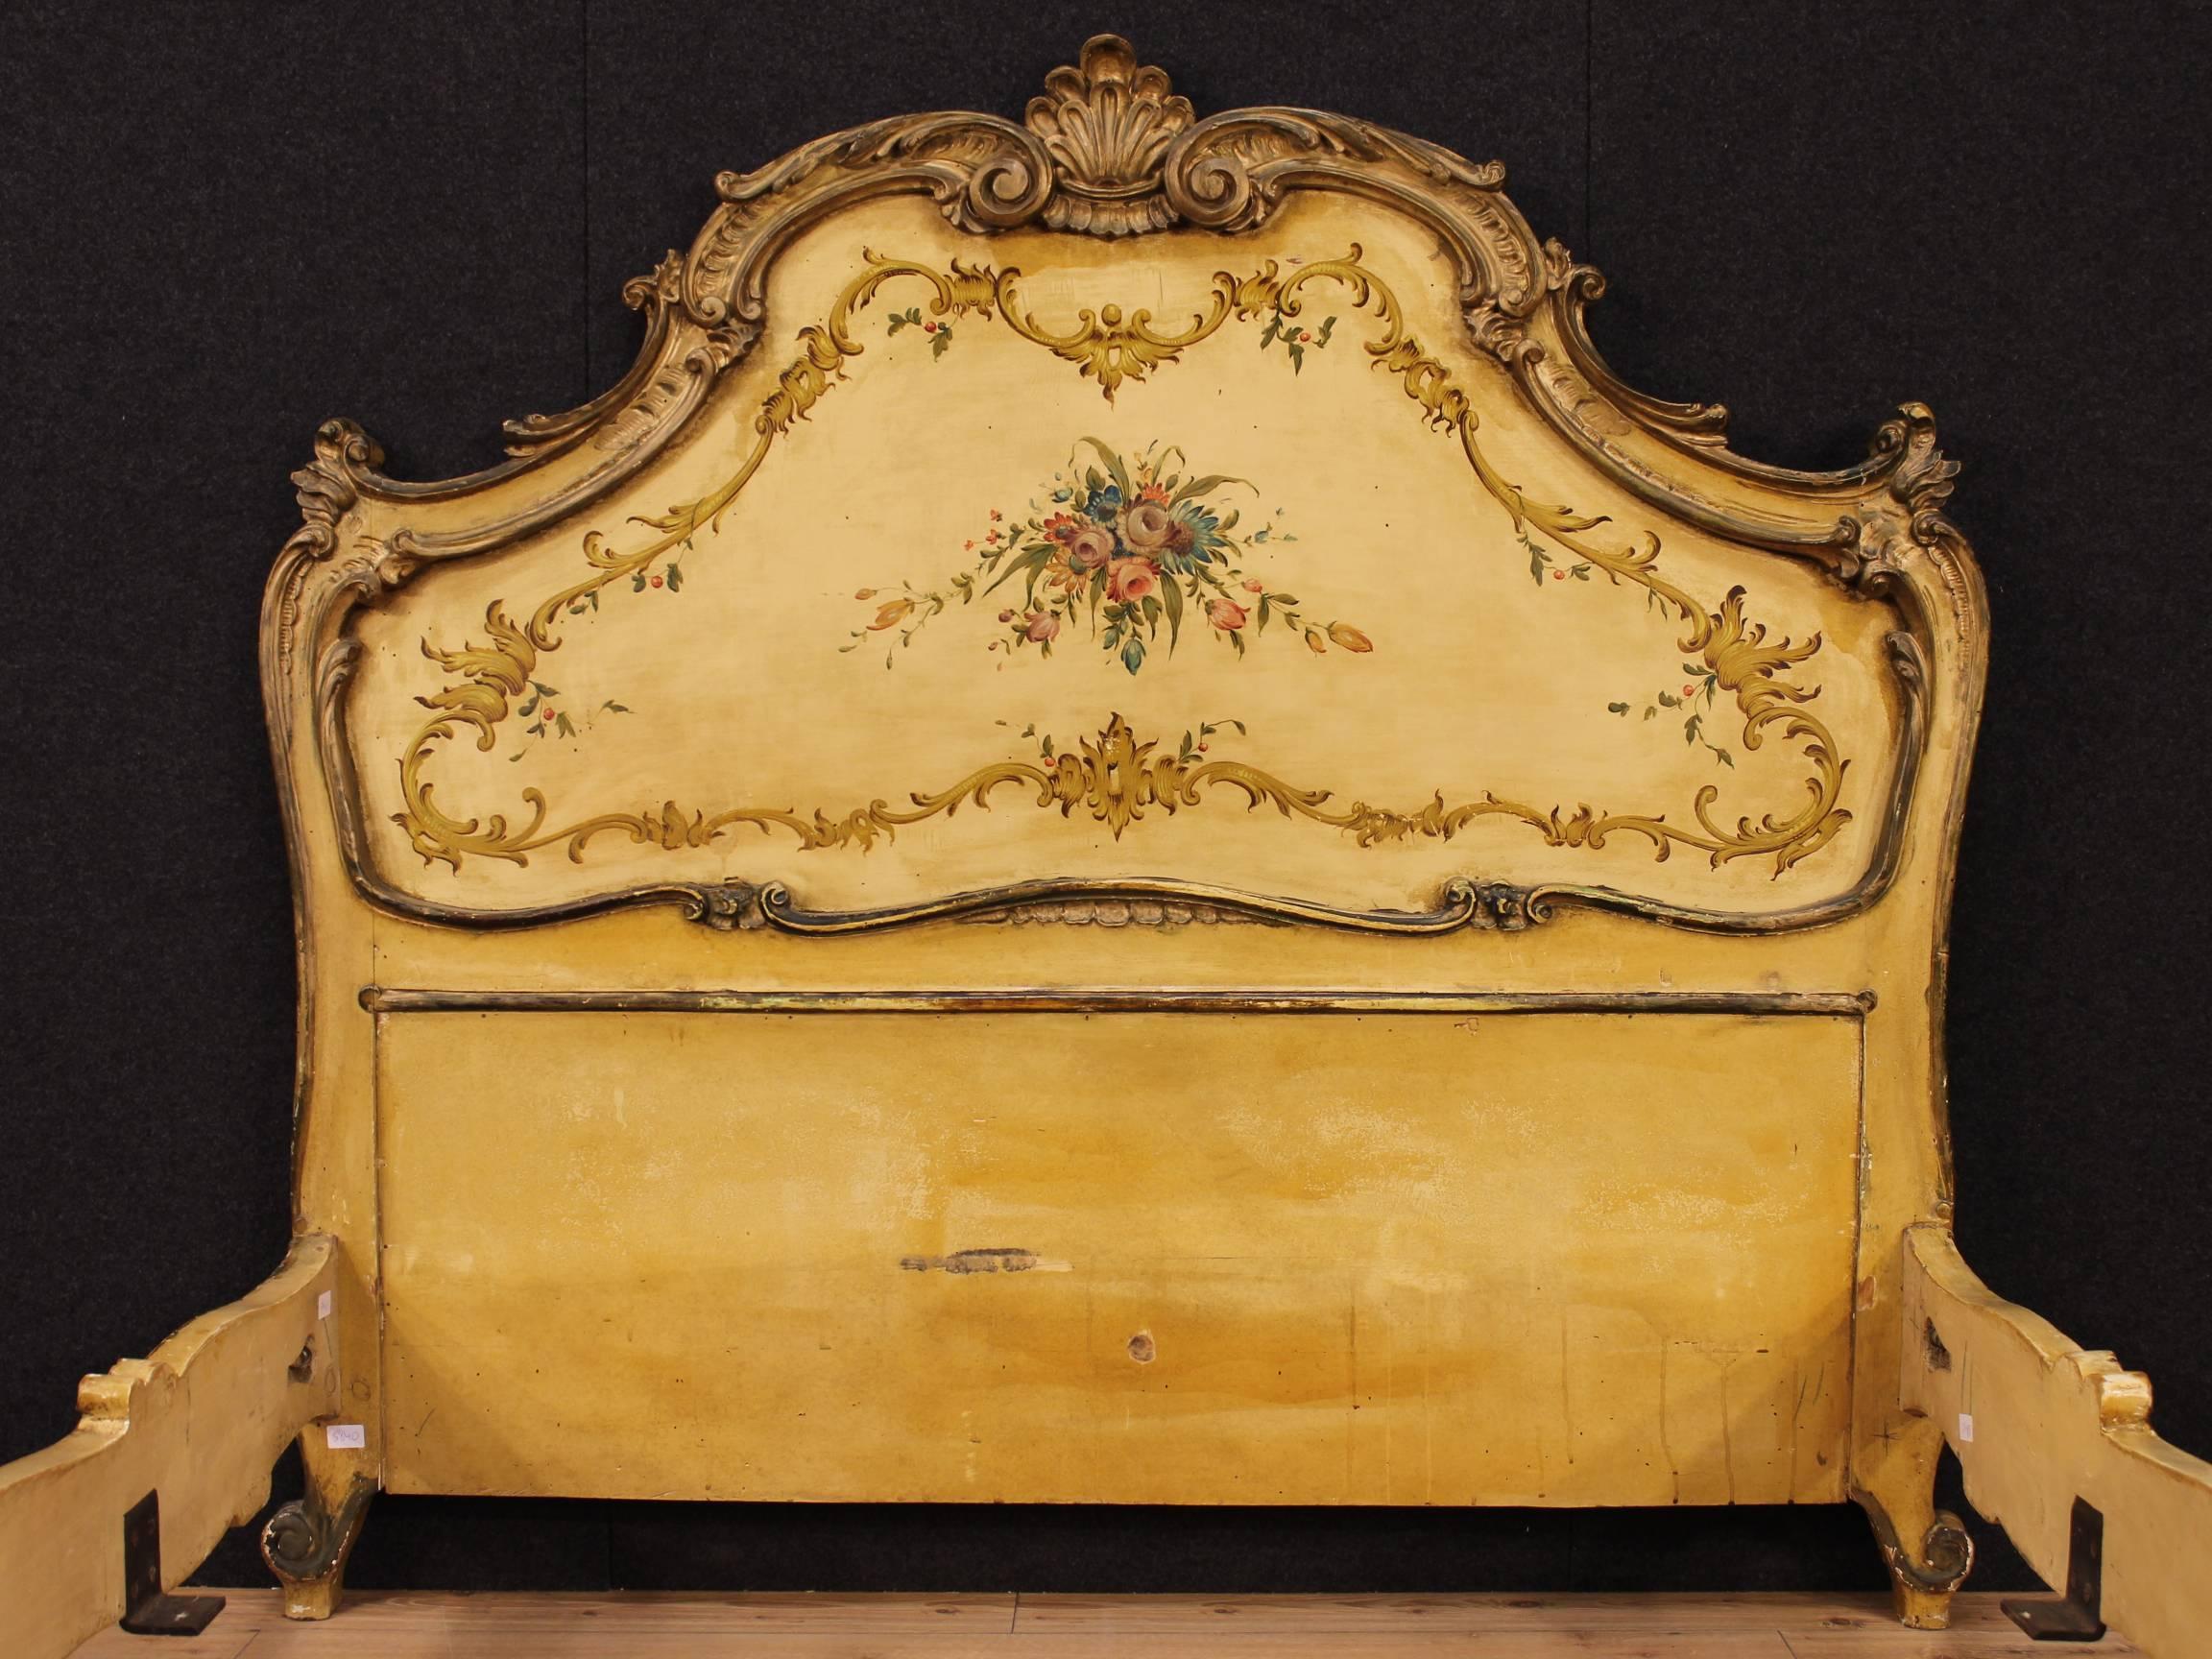 Spectacular Venetian bed of the 20th century. Furniture made by carved, gilded, lacquered and hand-painted with floral decorations wood. Queen-size bed nicely decorated with curled sculptures. Finished and decorated on three sides furniture, bed